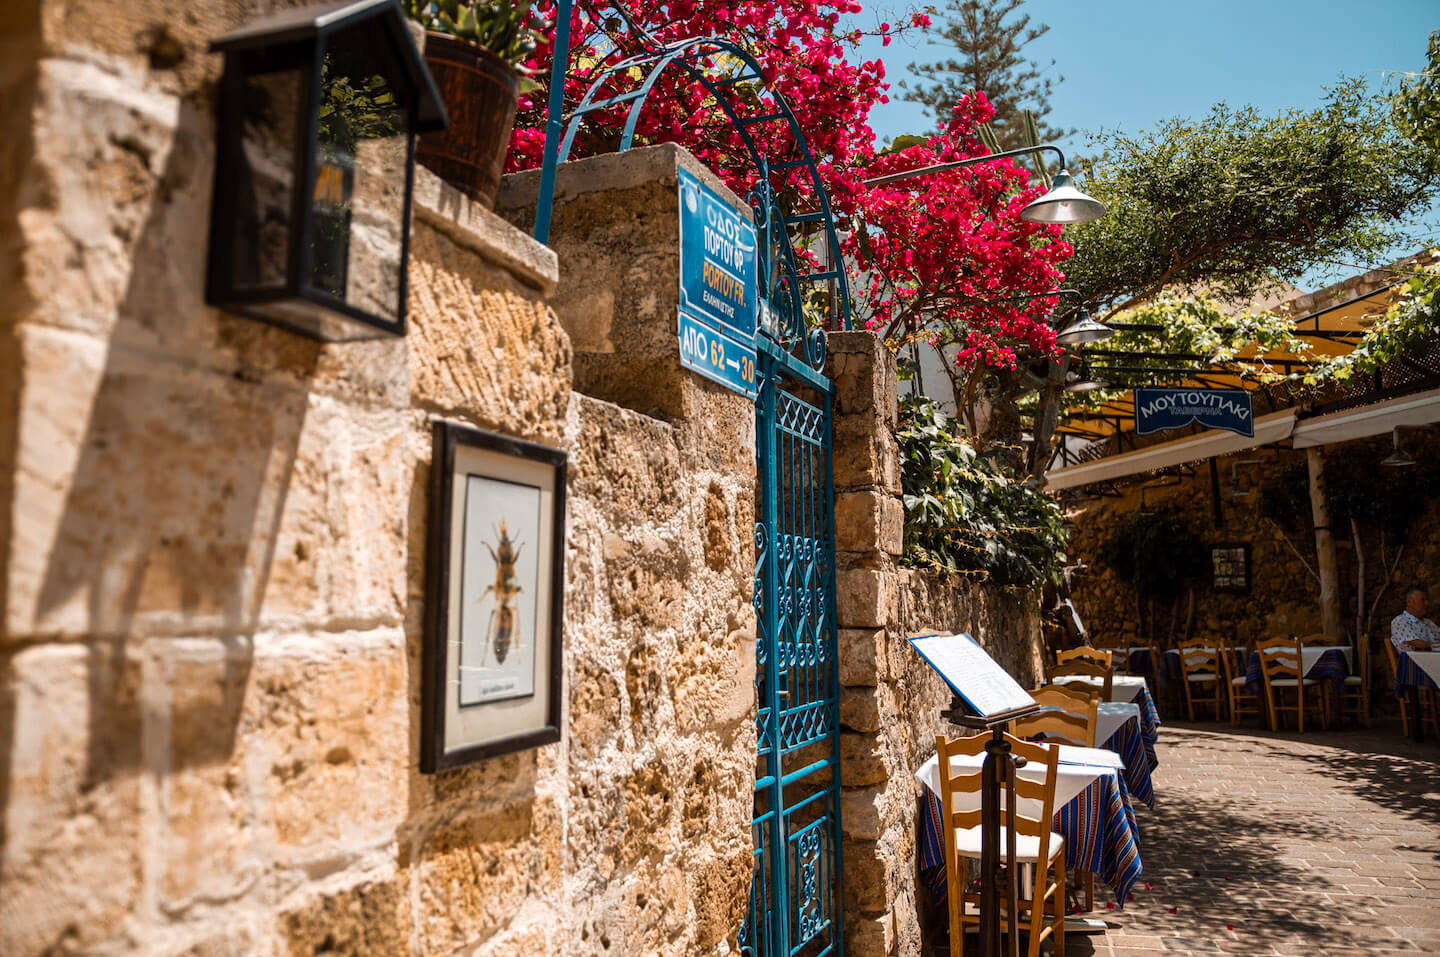 Picturesque alley in Chania Crete with red flowers